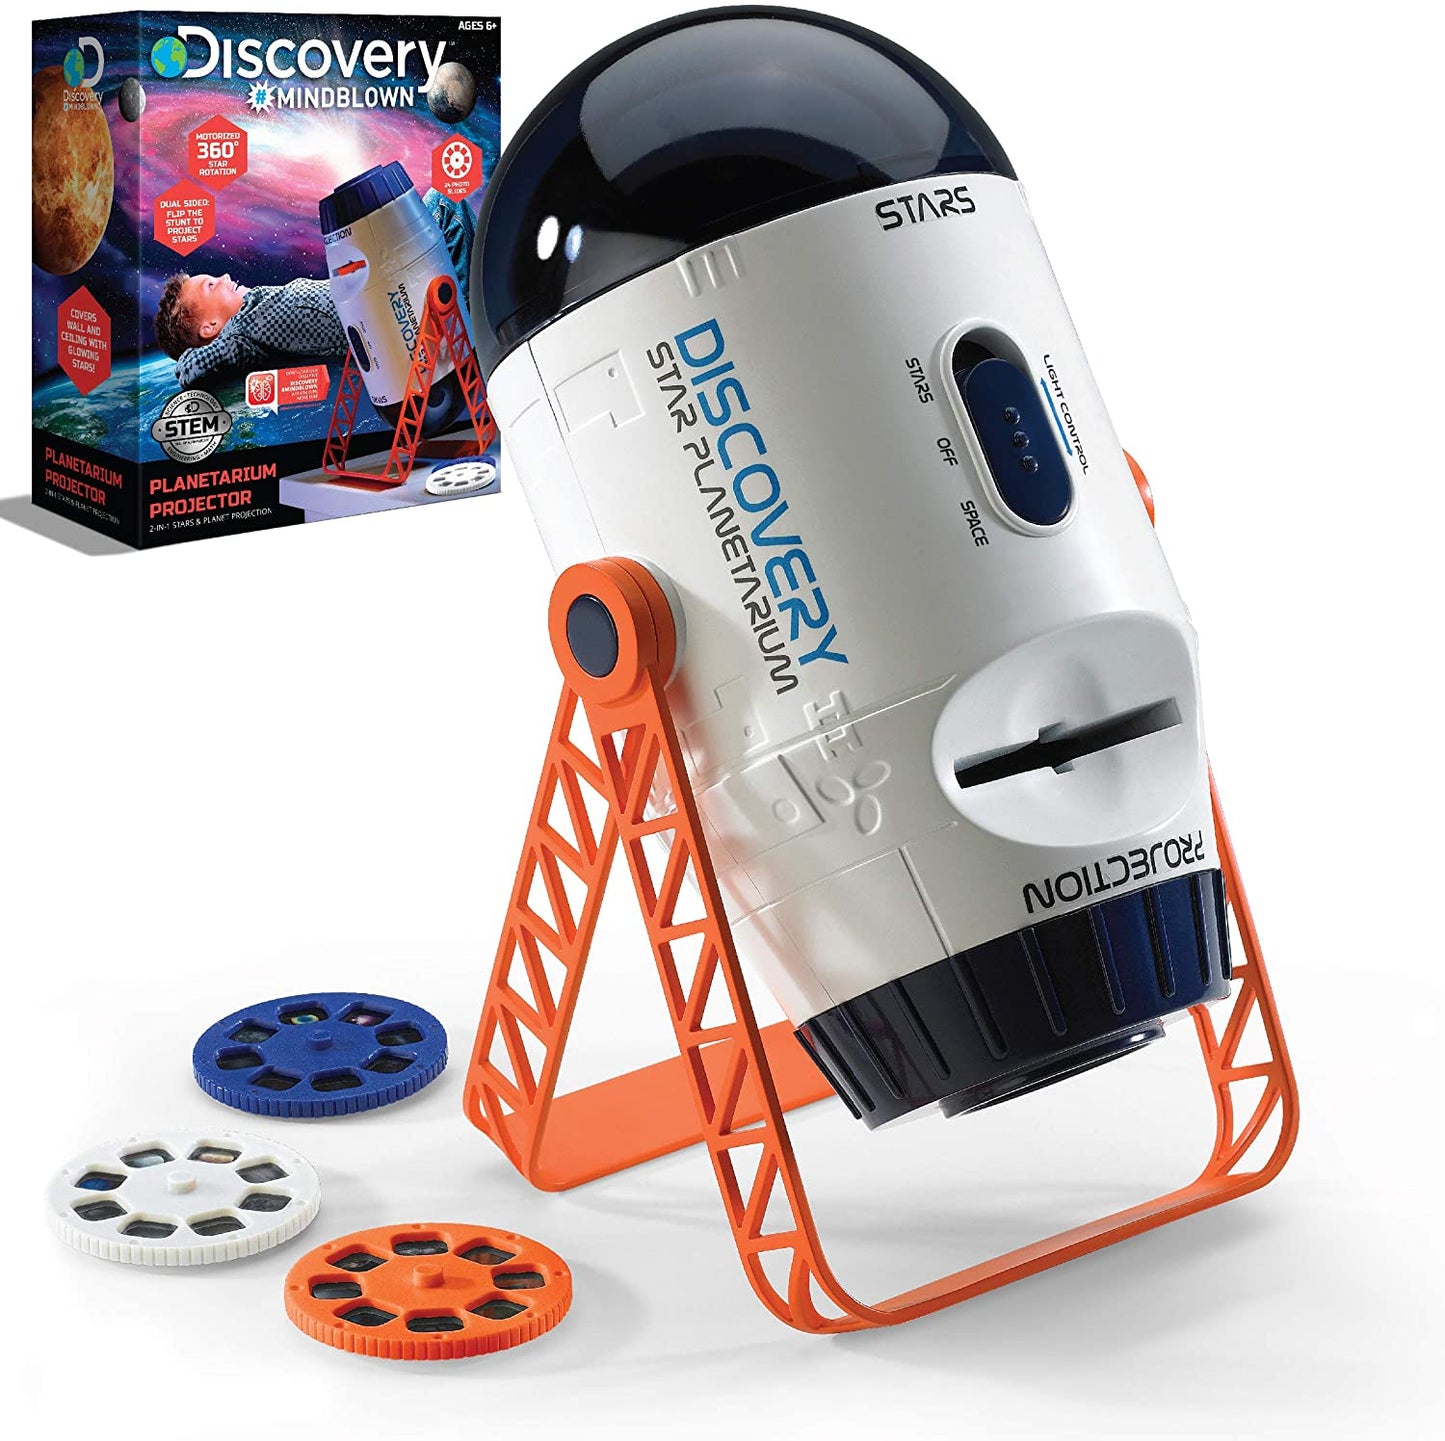 Discovery 2-in-1 Reversible Planetarium Space Projector – 360-Degree Rotation – Moving Stars Mode and Stationary Viewfinder Mode